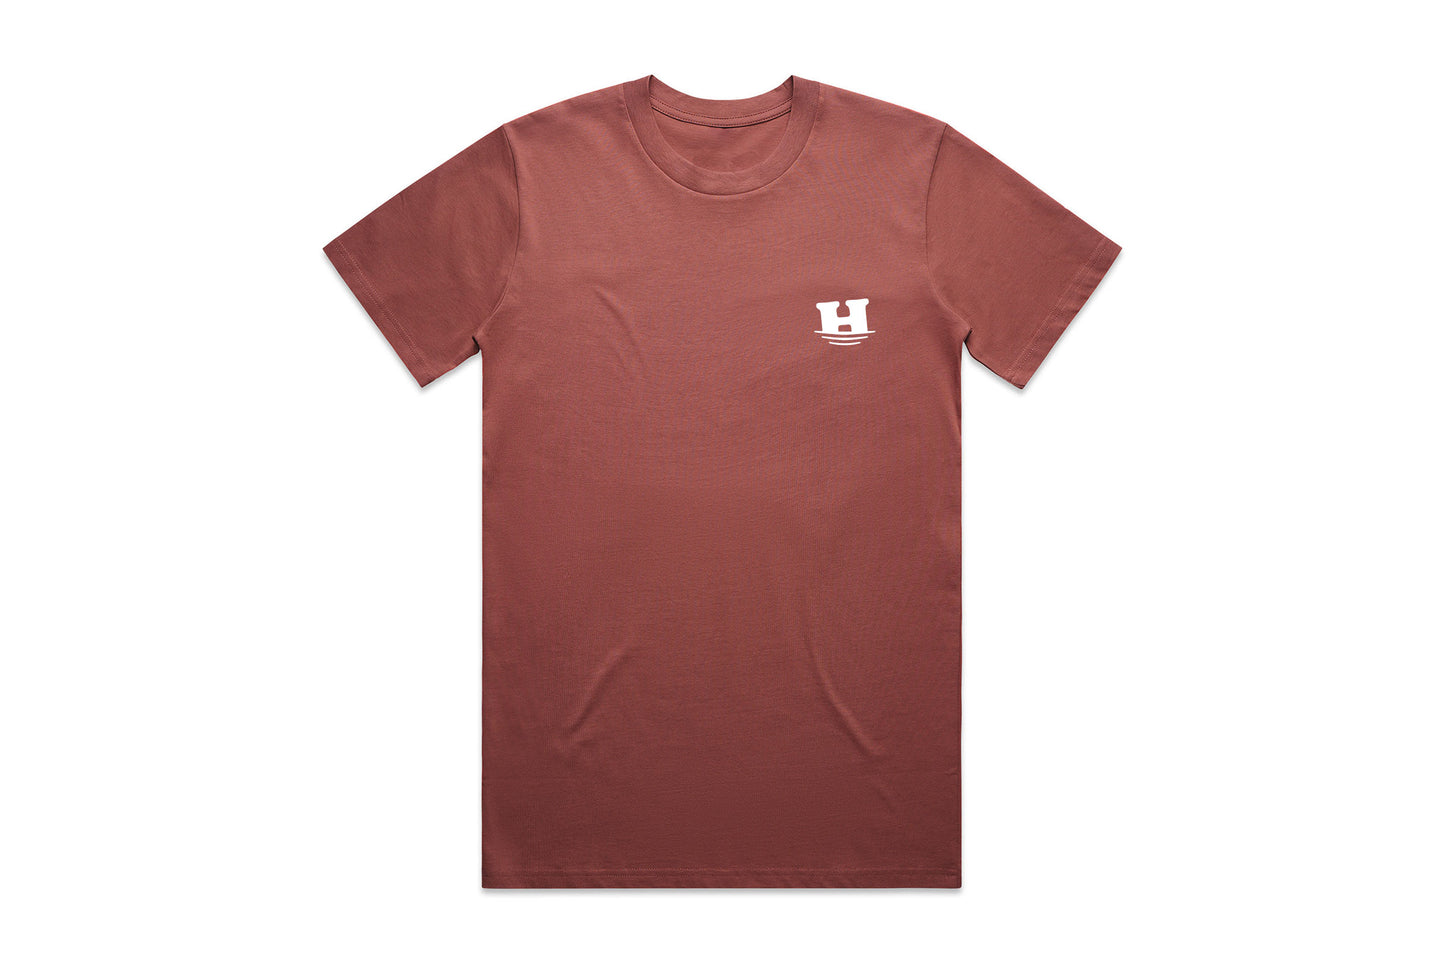 Front of t shirt graphic. Help MFG "Sinking-H" logo small on the left chest. Shirt is clay colored.